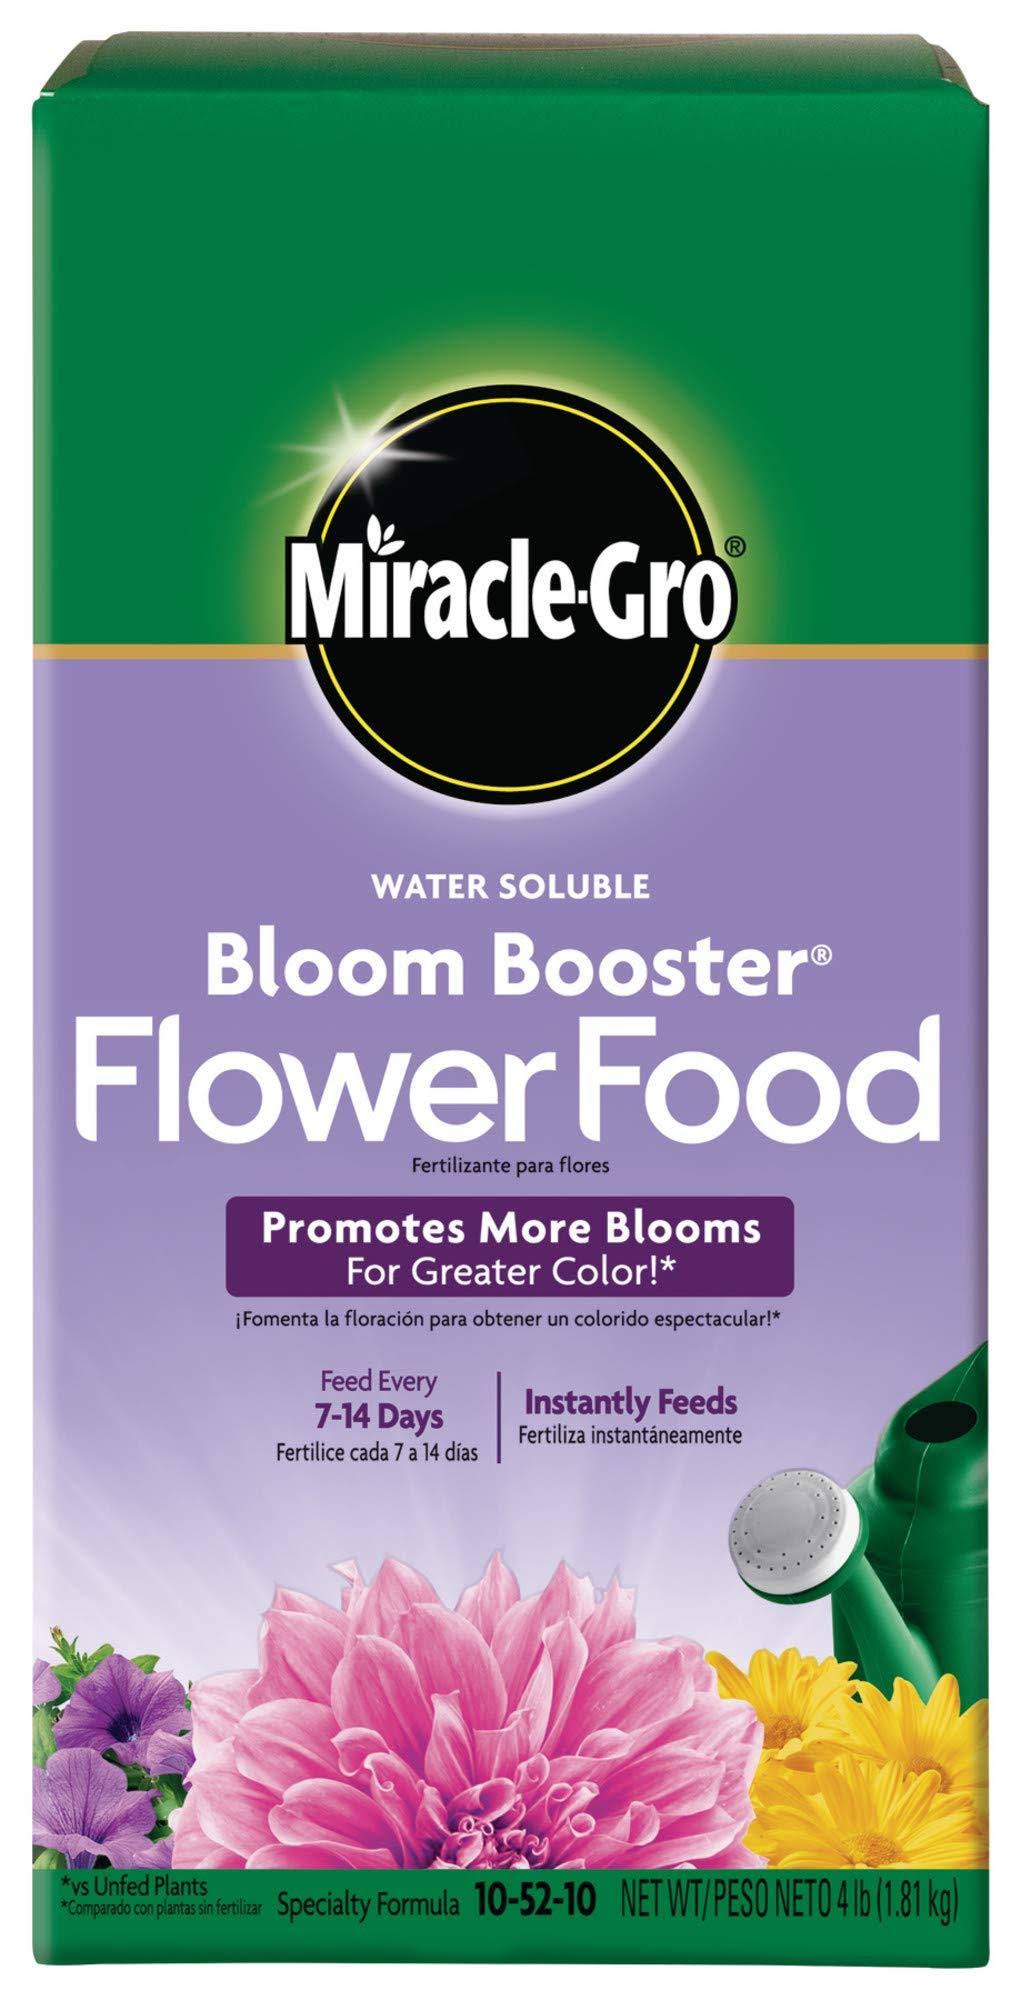 Miracle-Gro 146002 Water Soluble Bloom Booster Flower Food - 10-52-10, 4lb